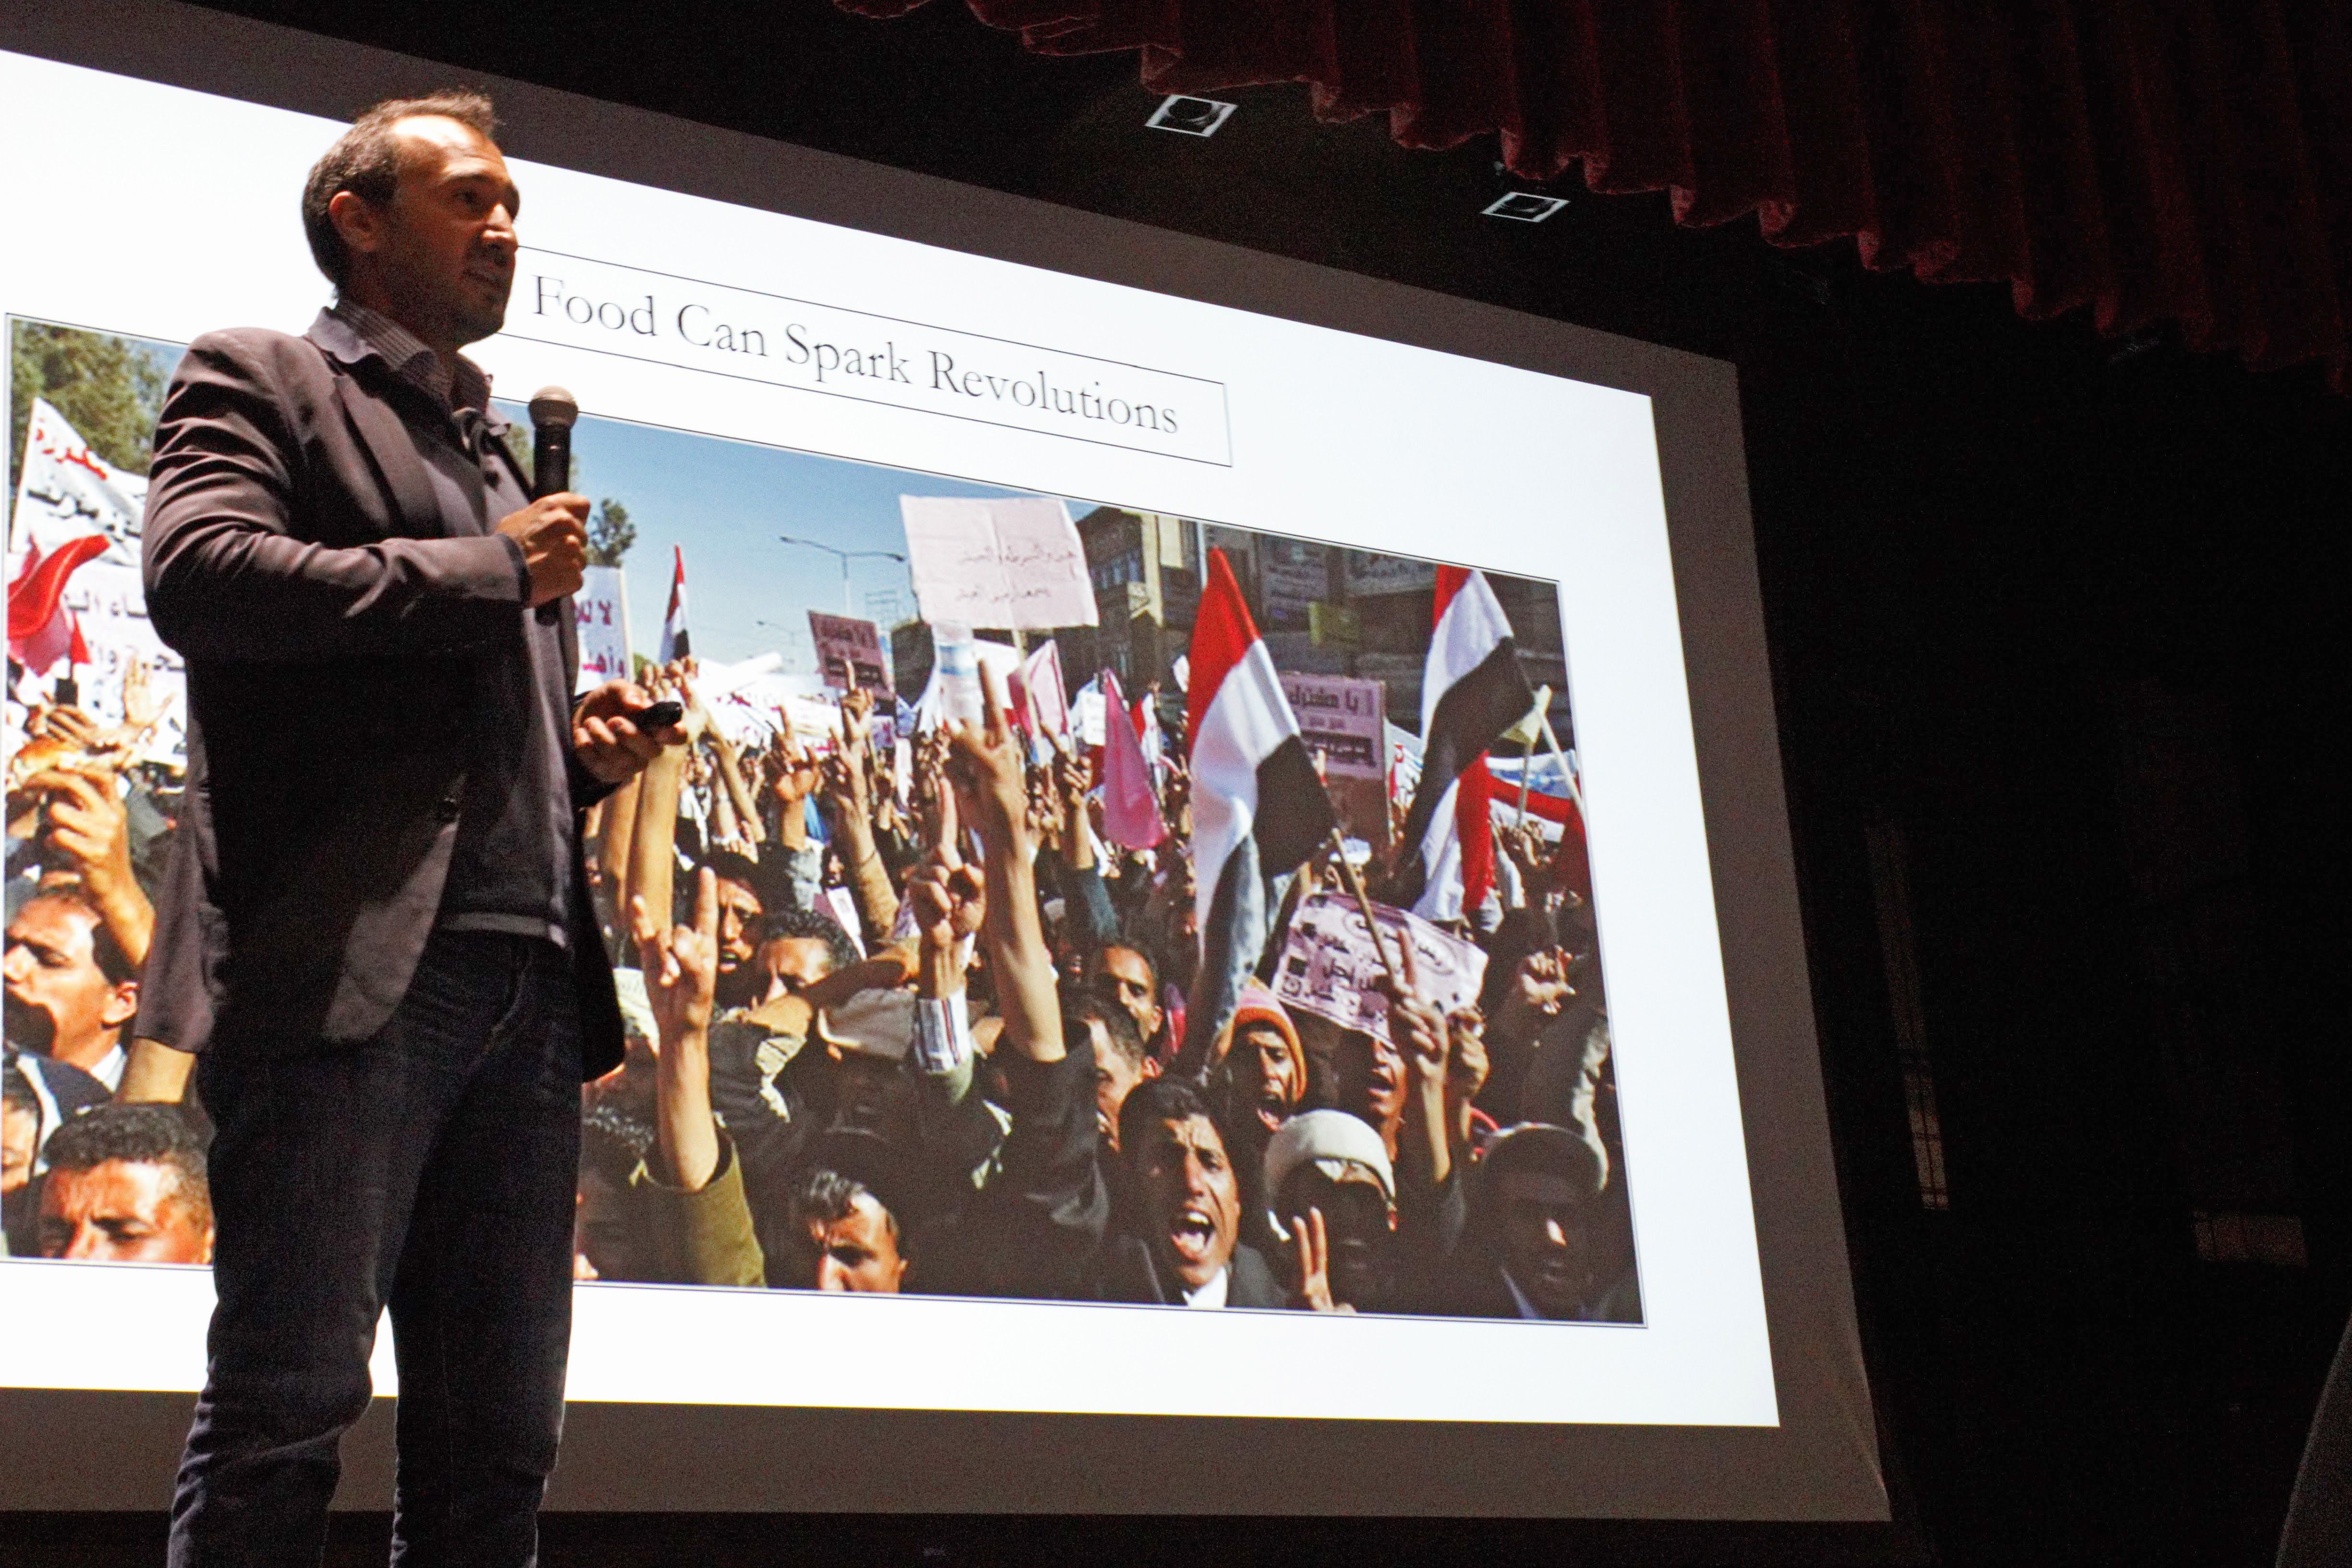 Following a screening of his film, Karim Chrobog presents his reporting project on food waste to students at Truman College. Image by Lauren Shepherd. U.S., 2016.